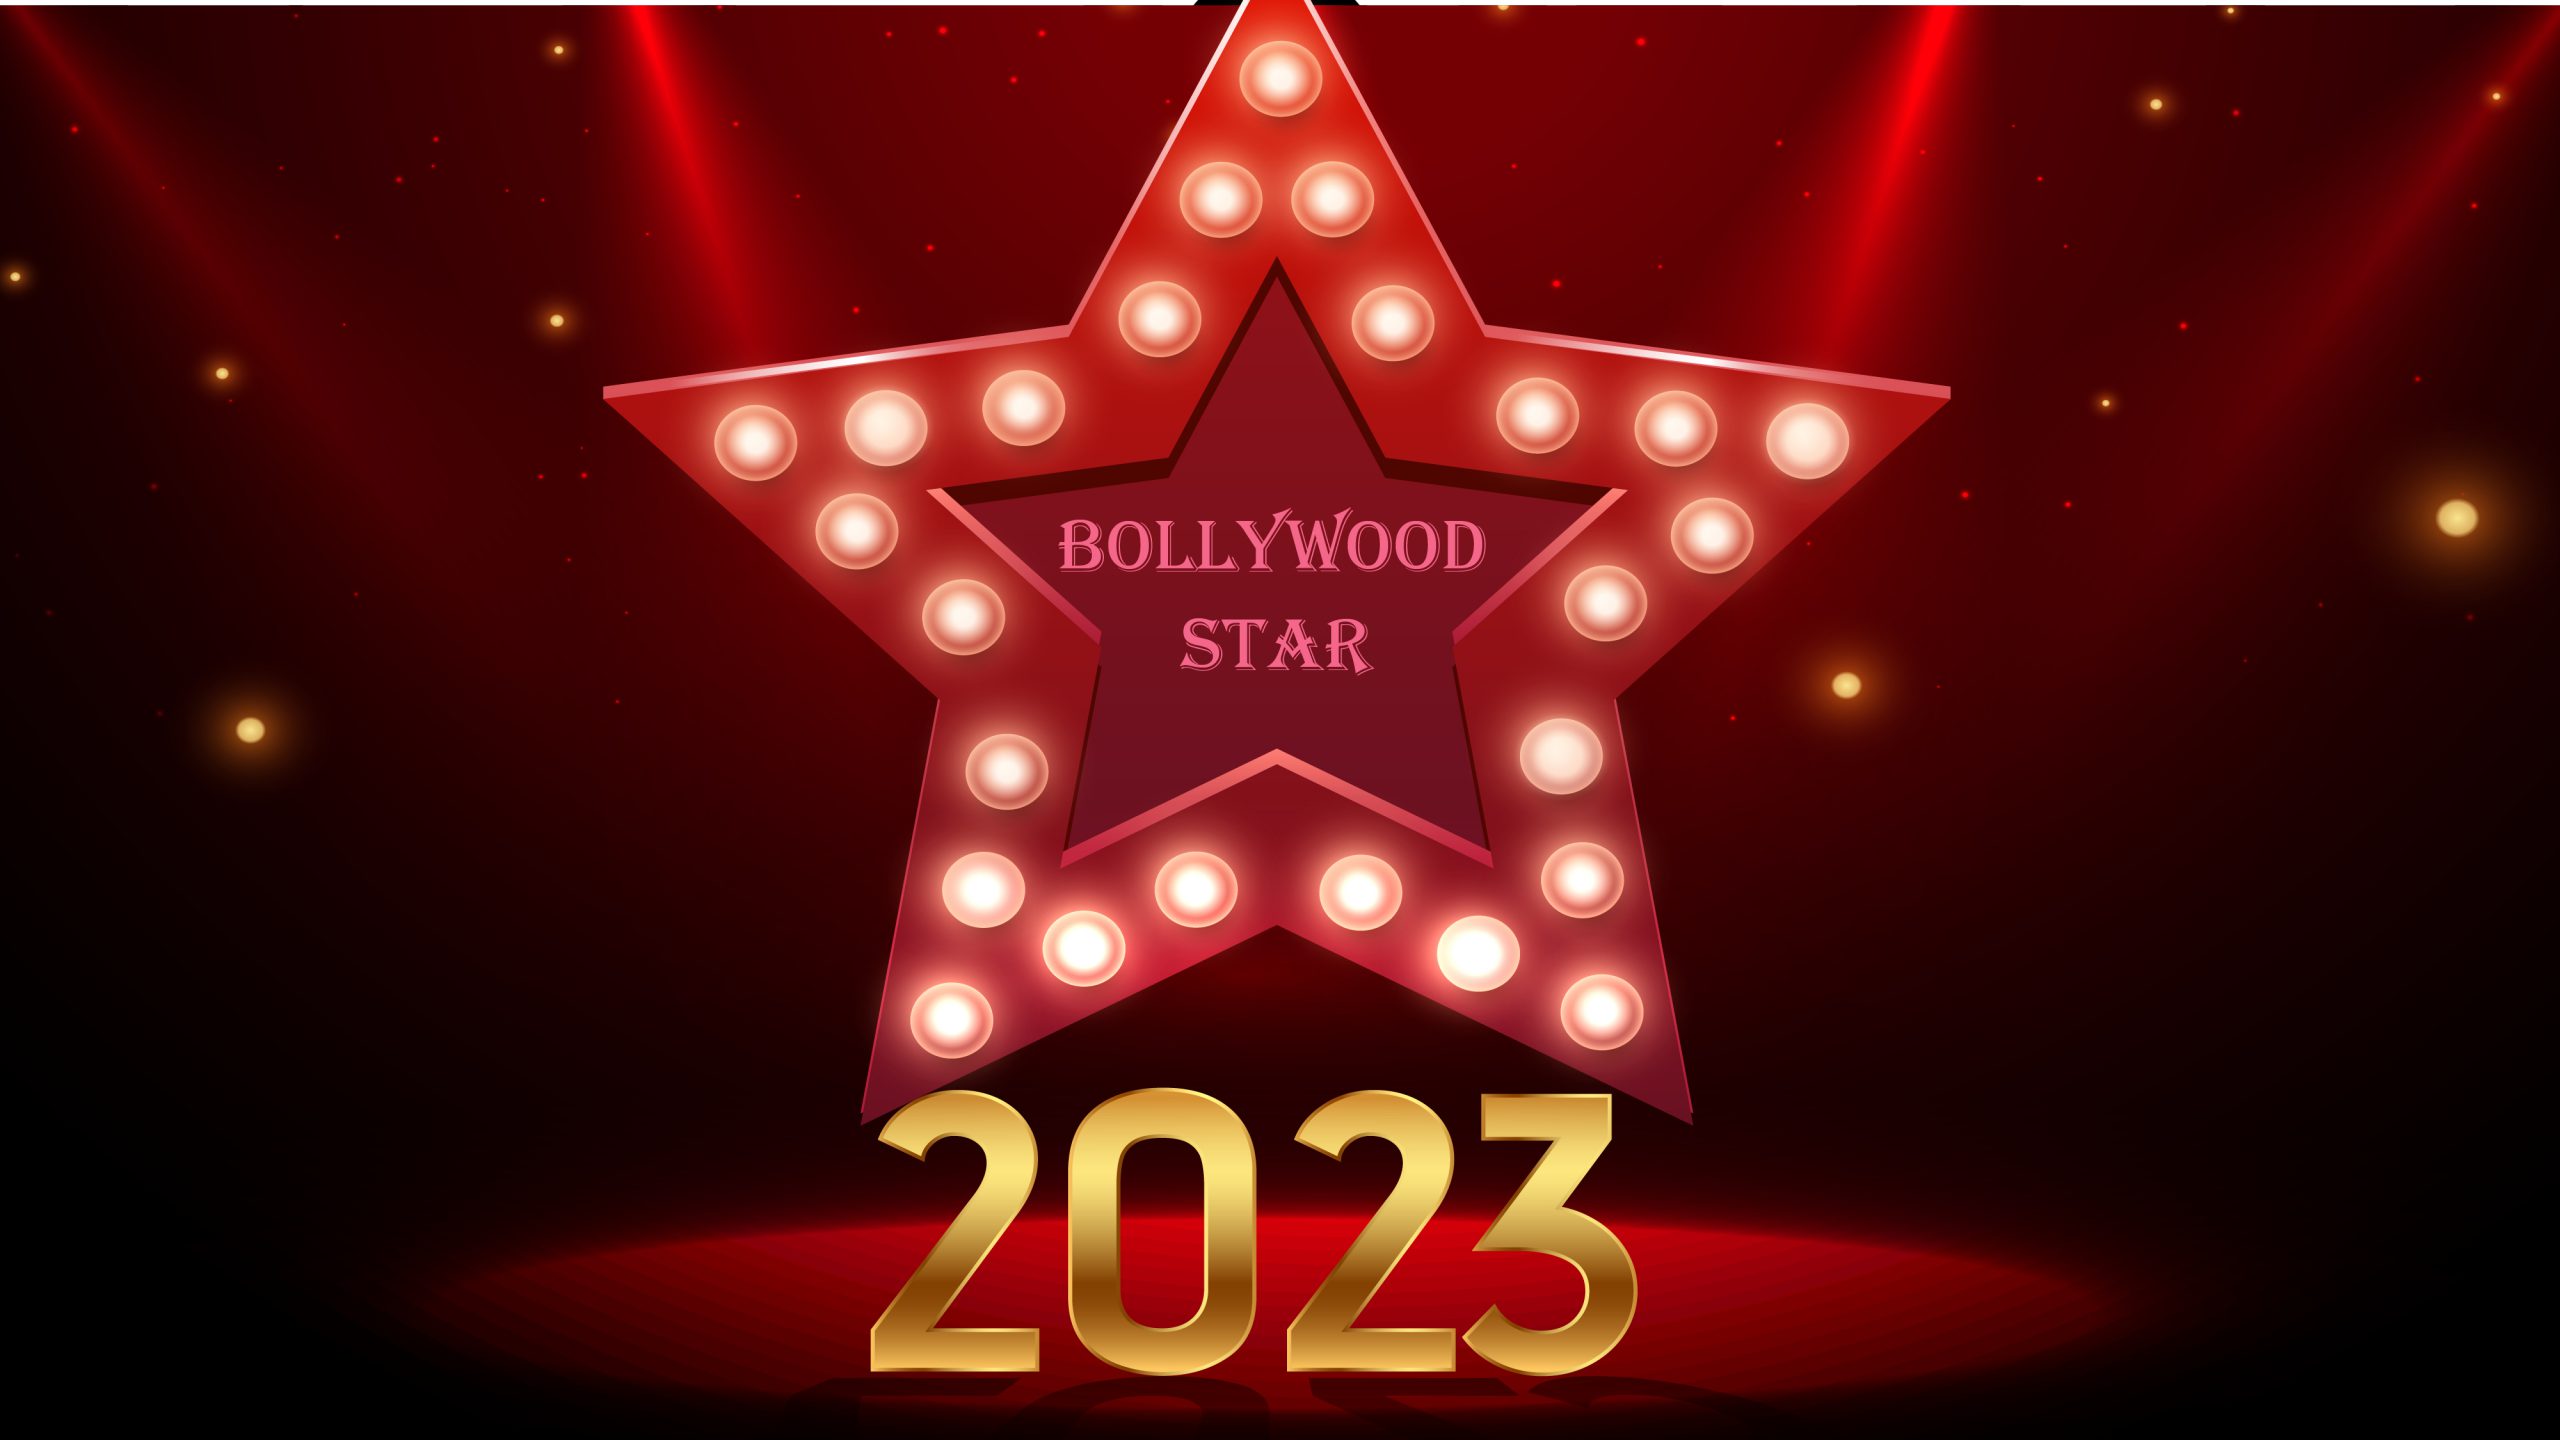 Star of Bollywood, young actor, mind-blowing, well-known, Variety's 2023 Impactful Women